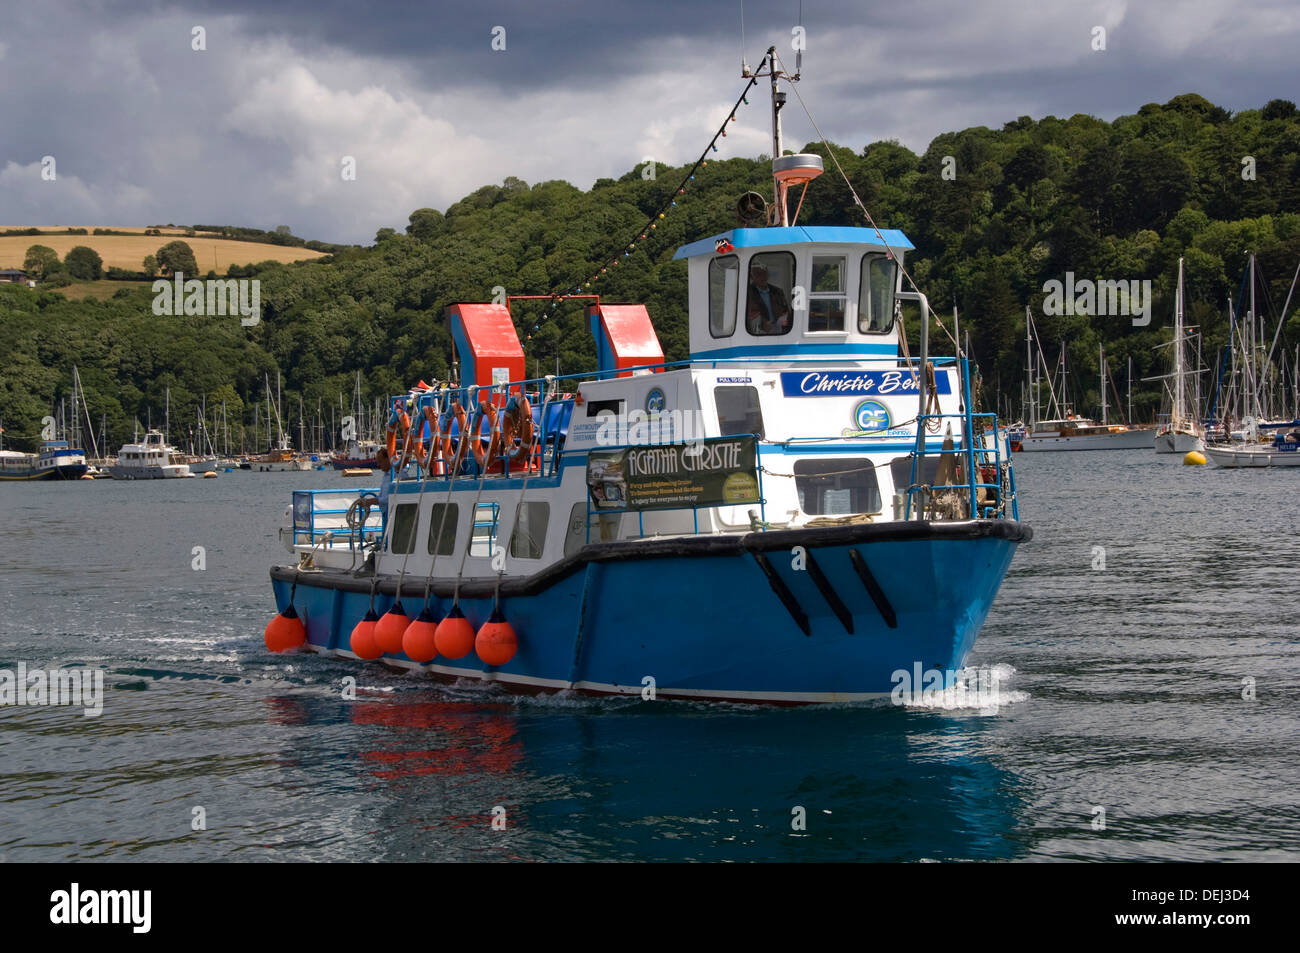 The Greenway ferry on the River Dart at Dartmouth taking passengers from Dartmouth to Greenway, the former house of Agatha Christie Stock Photo